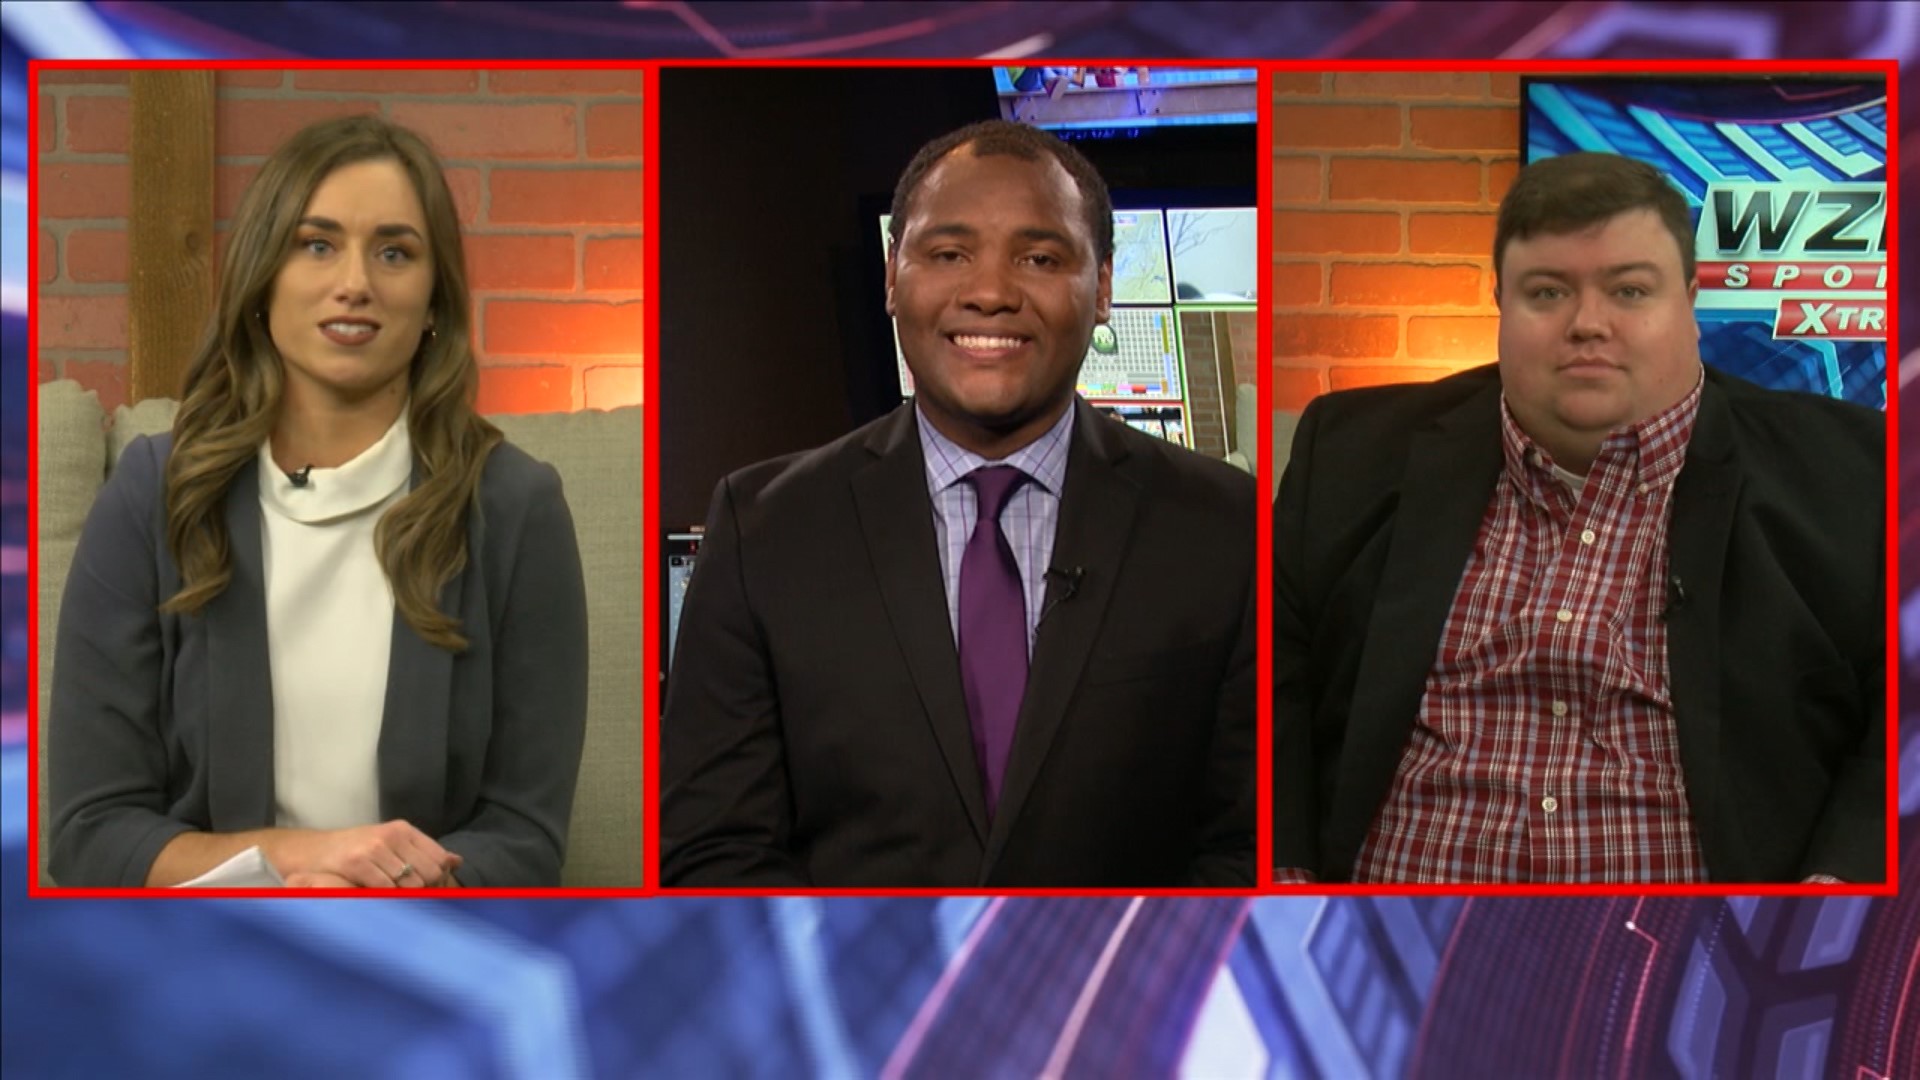 Tua Tagovailoa's decision to enter the 2020 NFL Draft is still making headlines across the state. Mo Carter, Kayla Carlile and special guest Arky Shea shared their thoughts on Tua's final decision to forgo his senior year at Alabama.